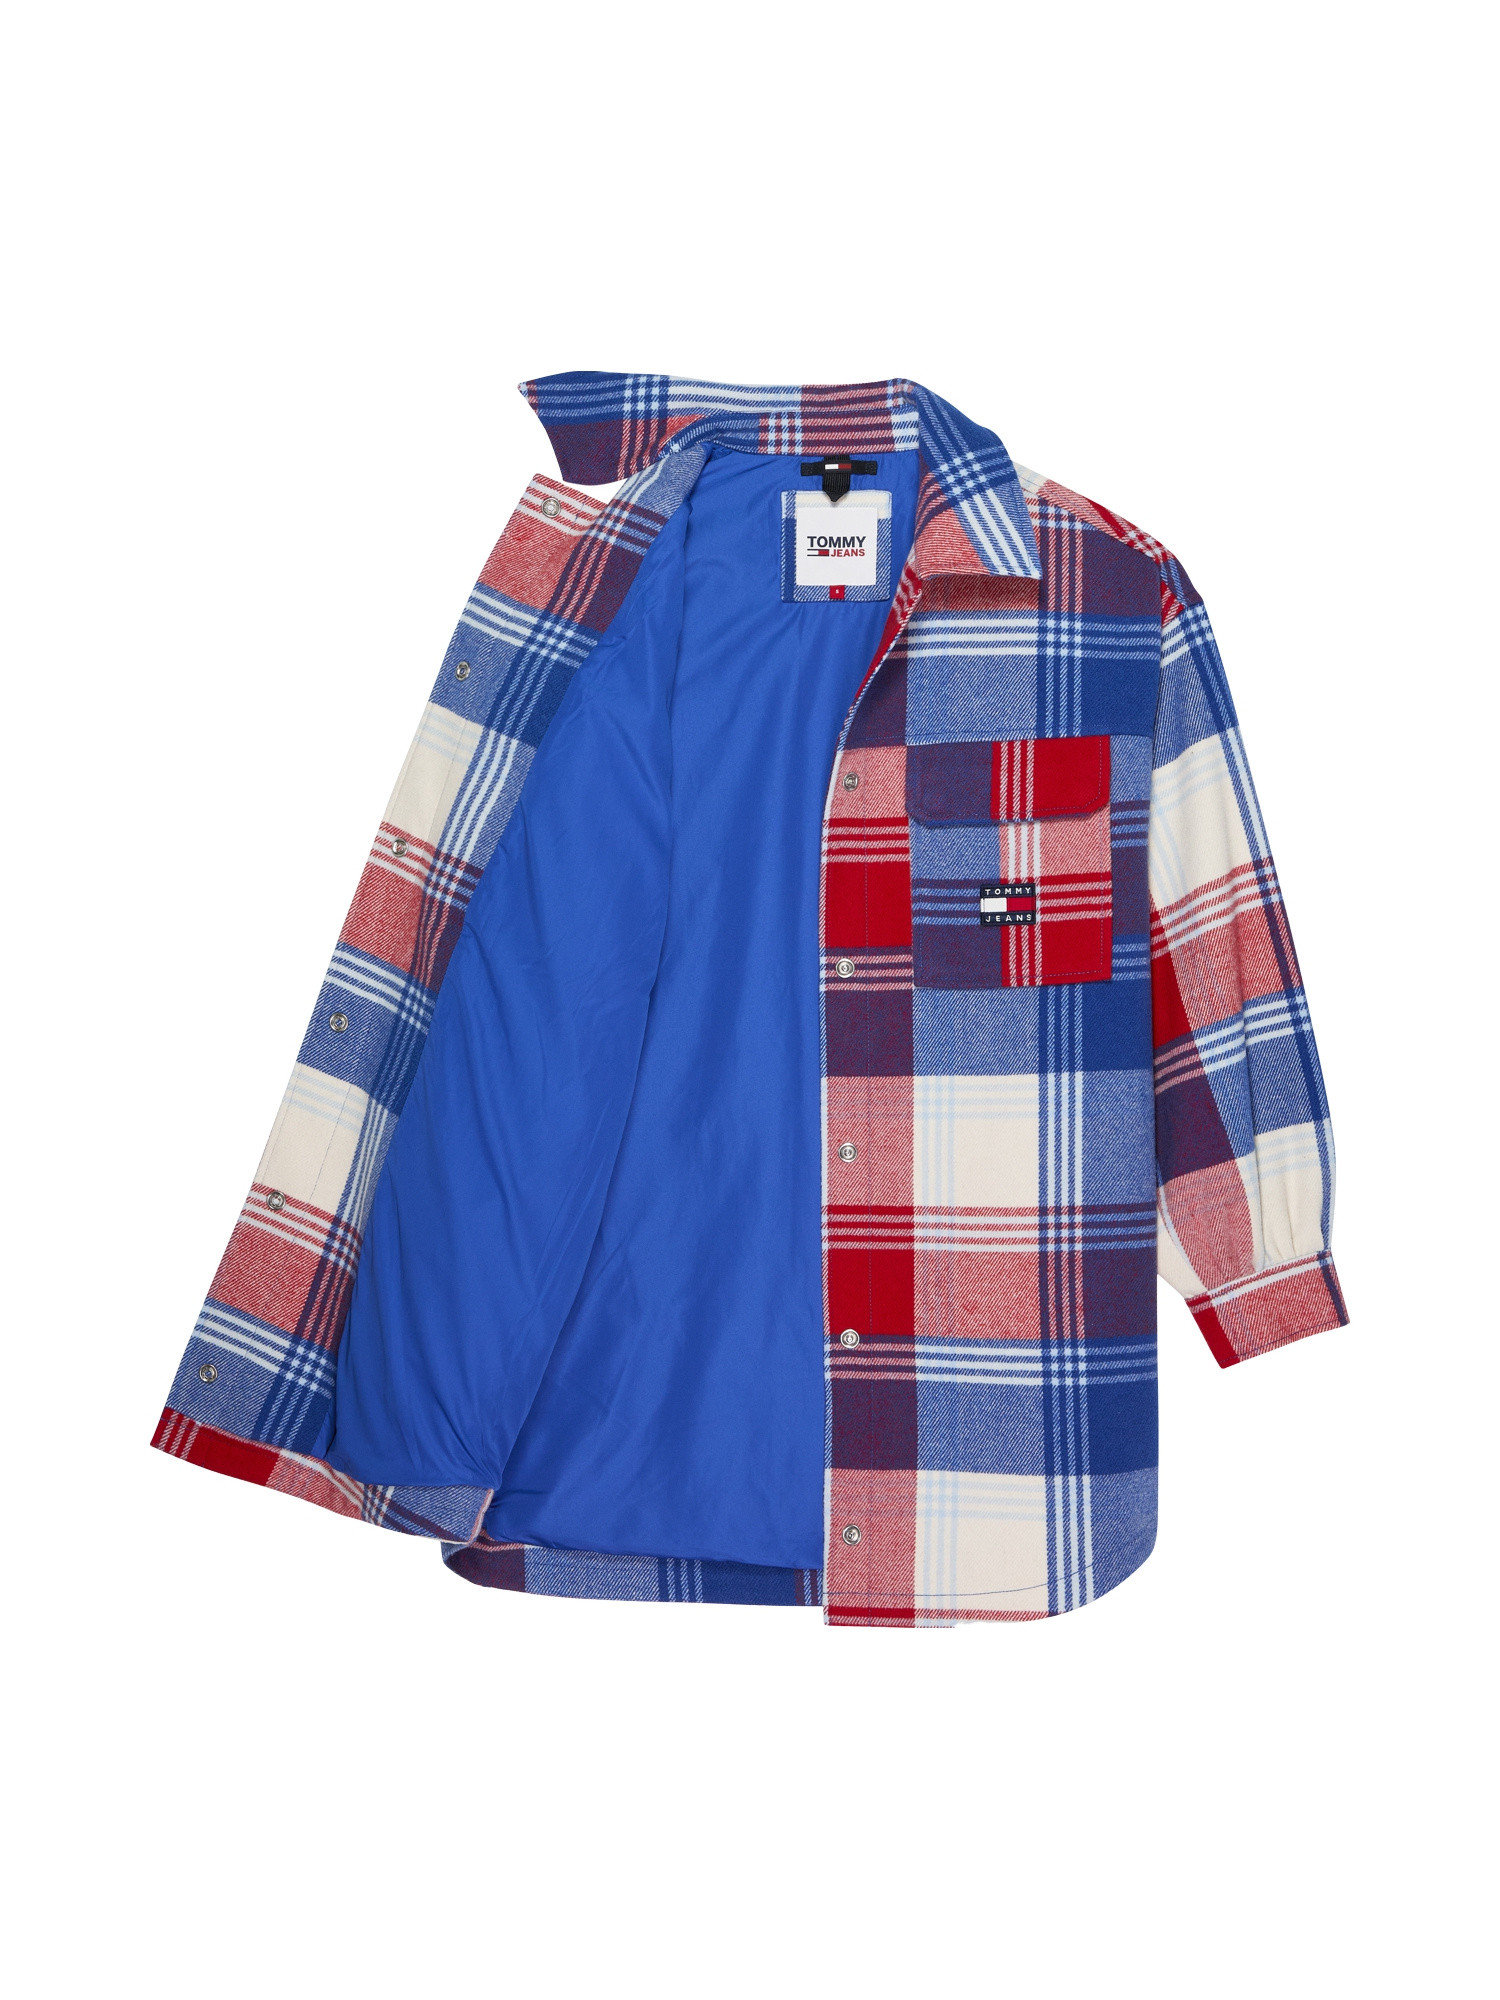 Tommy Jeans - Check Shirt, Red, large image number 2